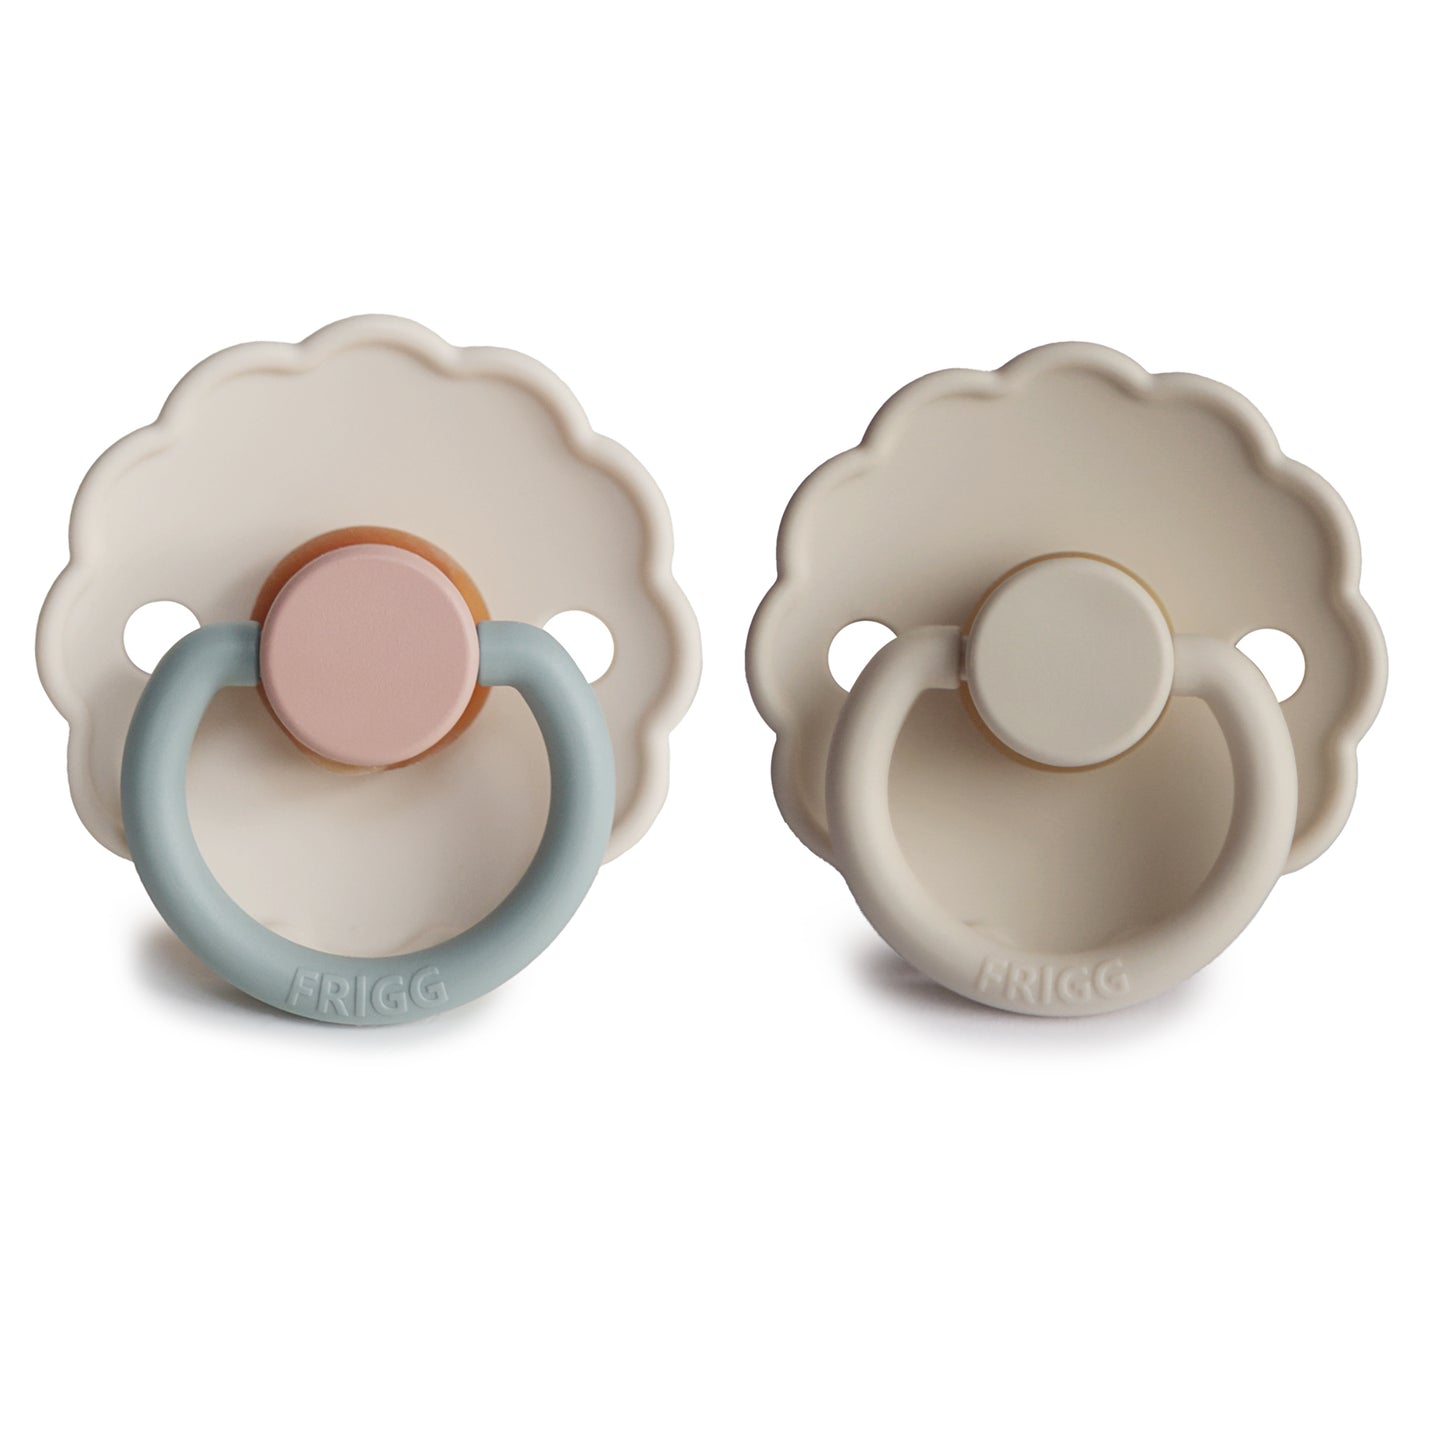 FRIGG DAISY NATURAL RUBBER BABY PACIFIER (COTTON CANDY/SANDSTONE) 2-PACK